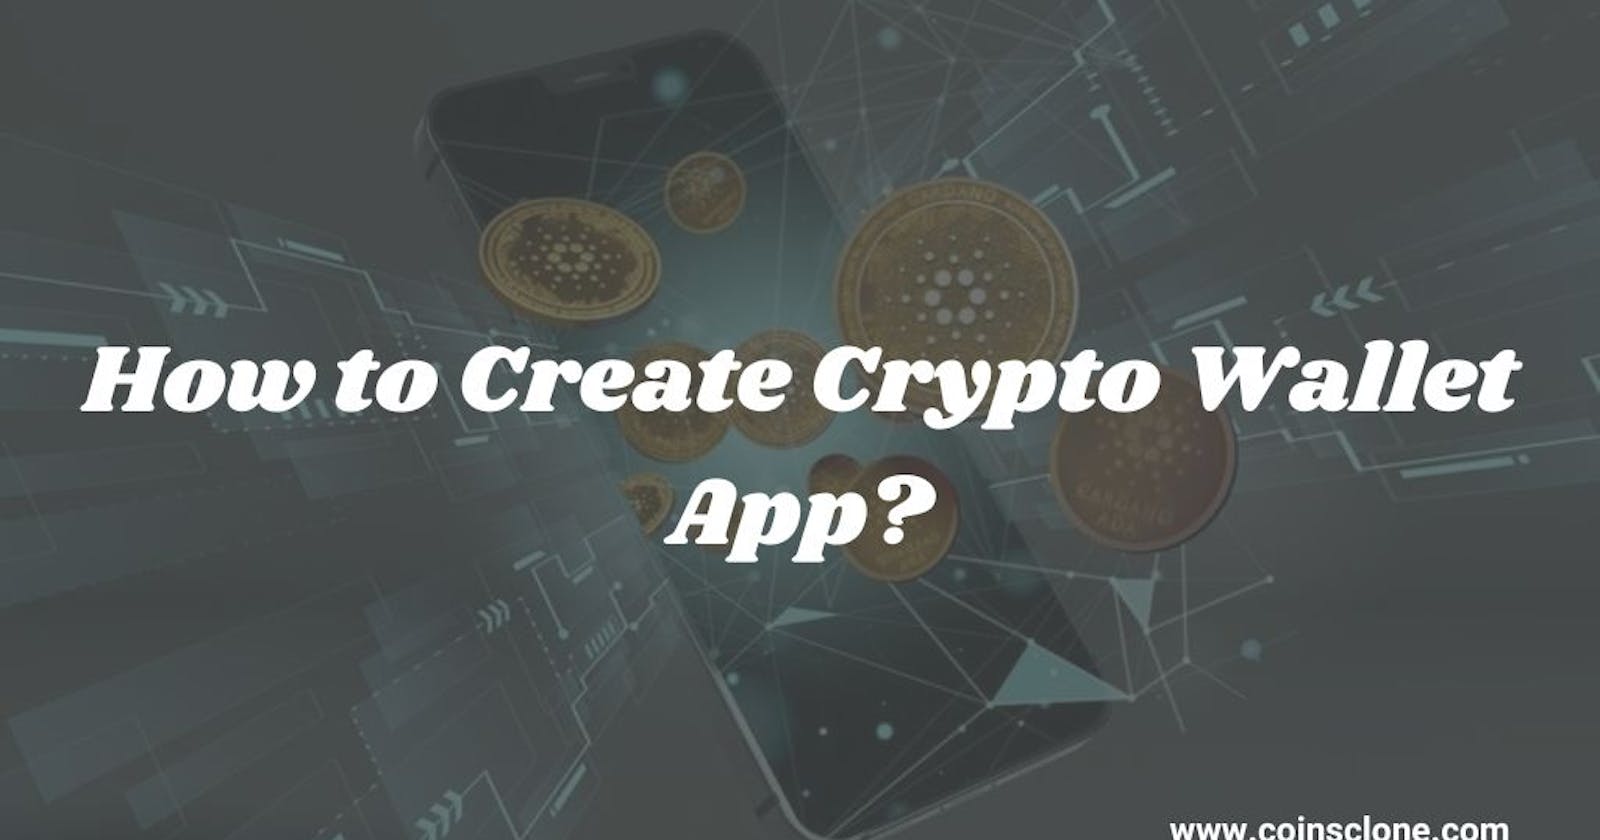 Building Your Own Crypto Wallet App: A Step-by-Step Guide